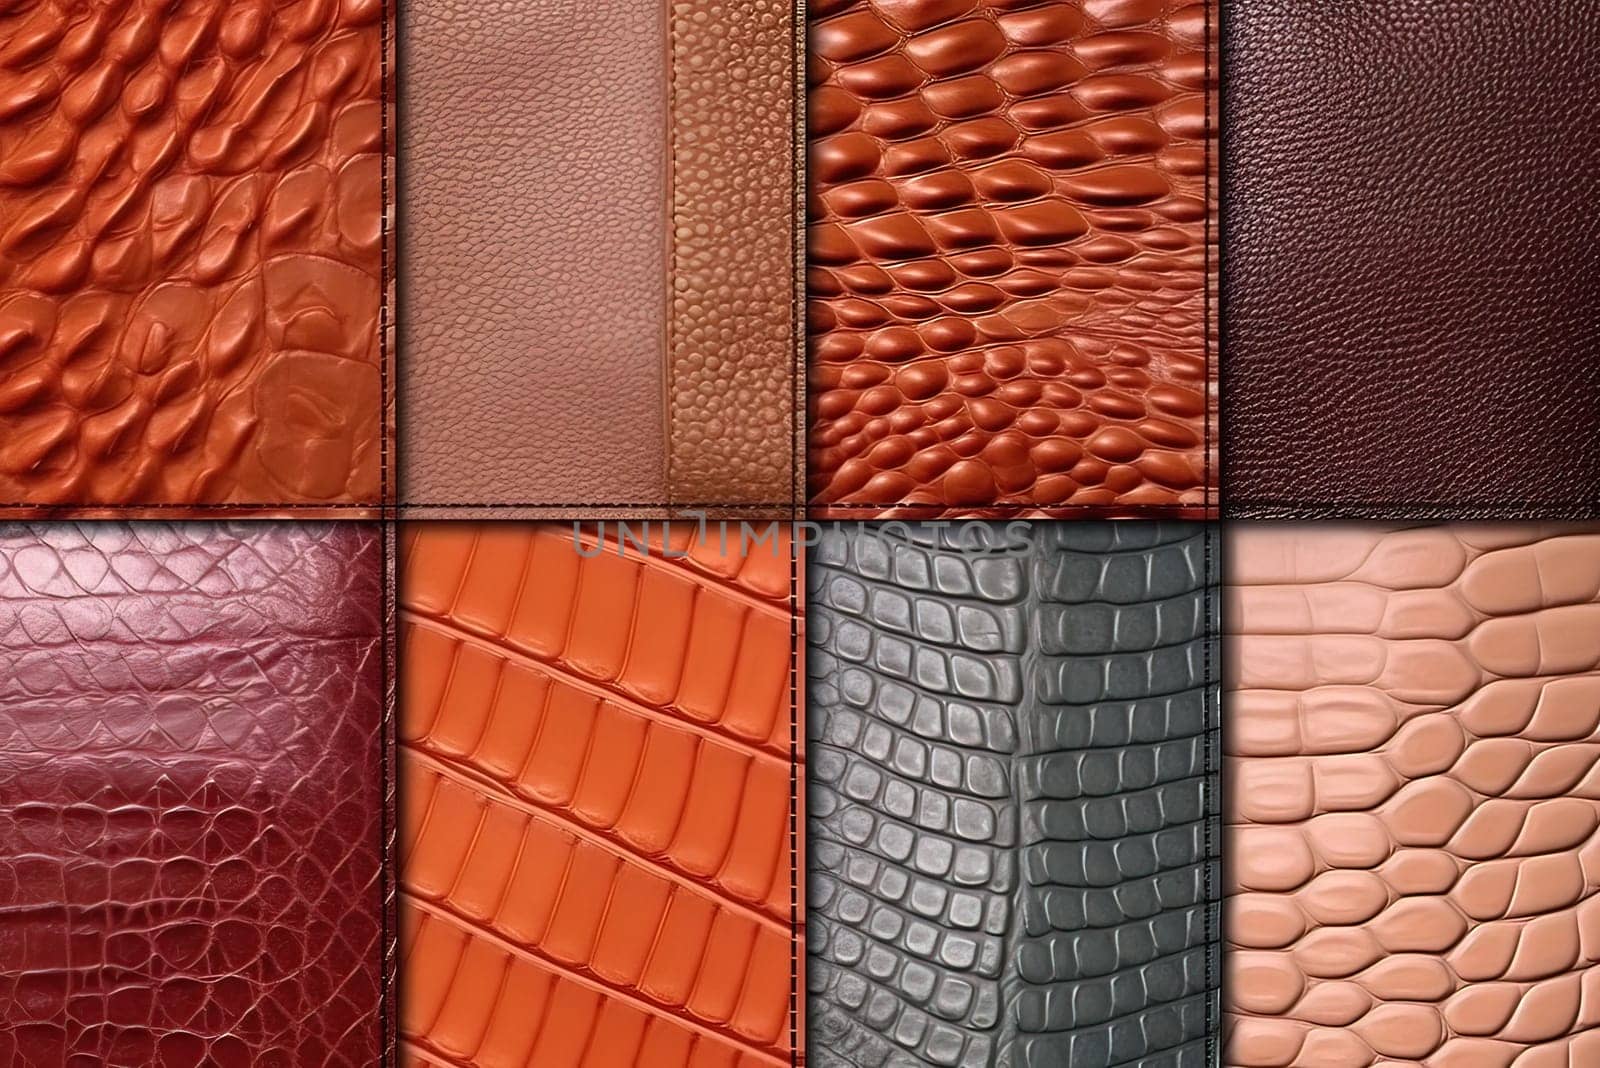 Examples of leather textures for sewing bags. Generative Artificial Intelligence. High quality illustration